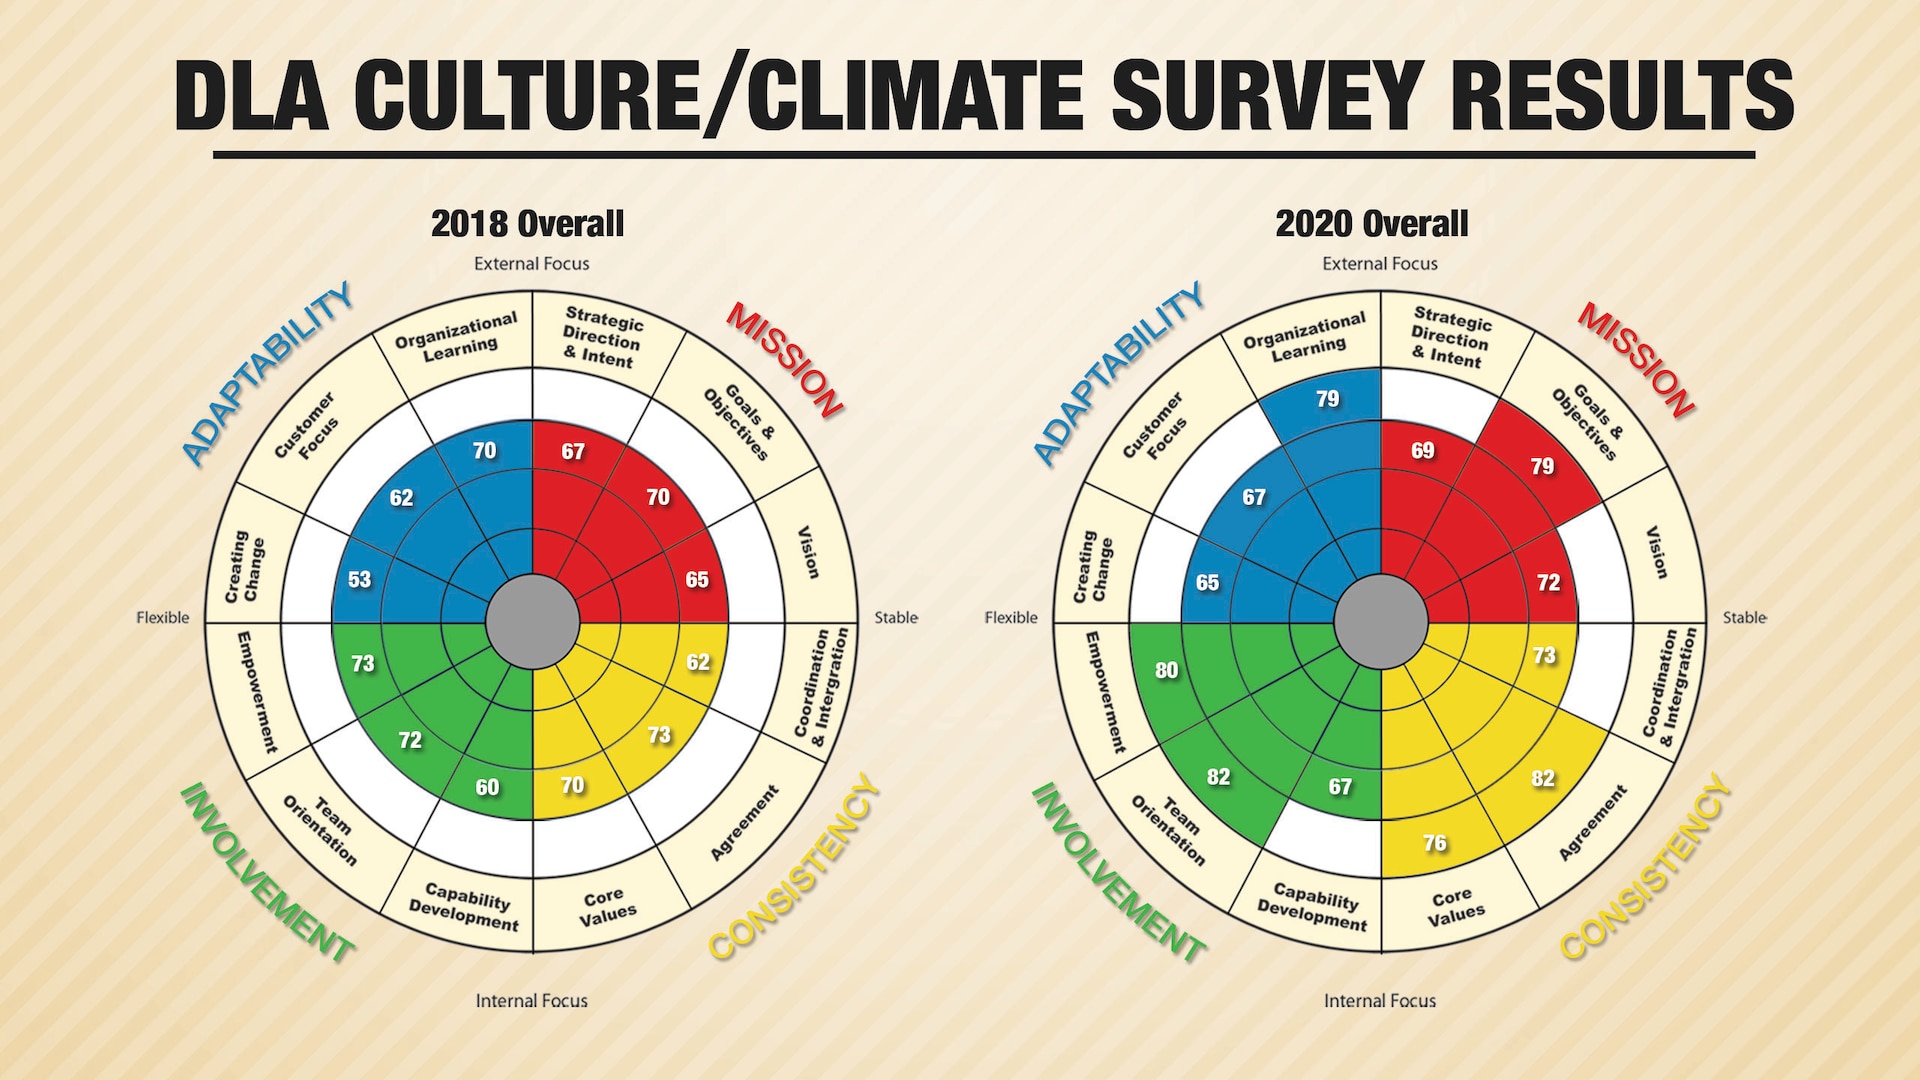 Color wheel graphics show the difference in scores between the 2018 and 2020 Culture/Climate Survey.